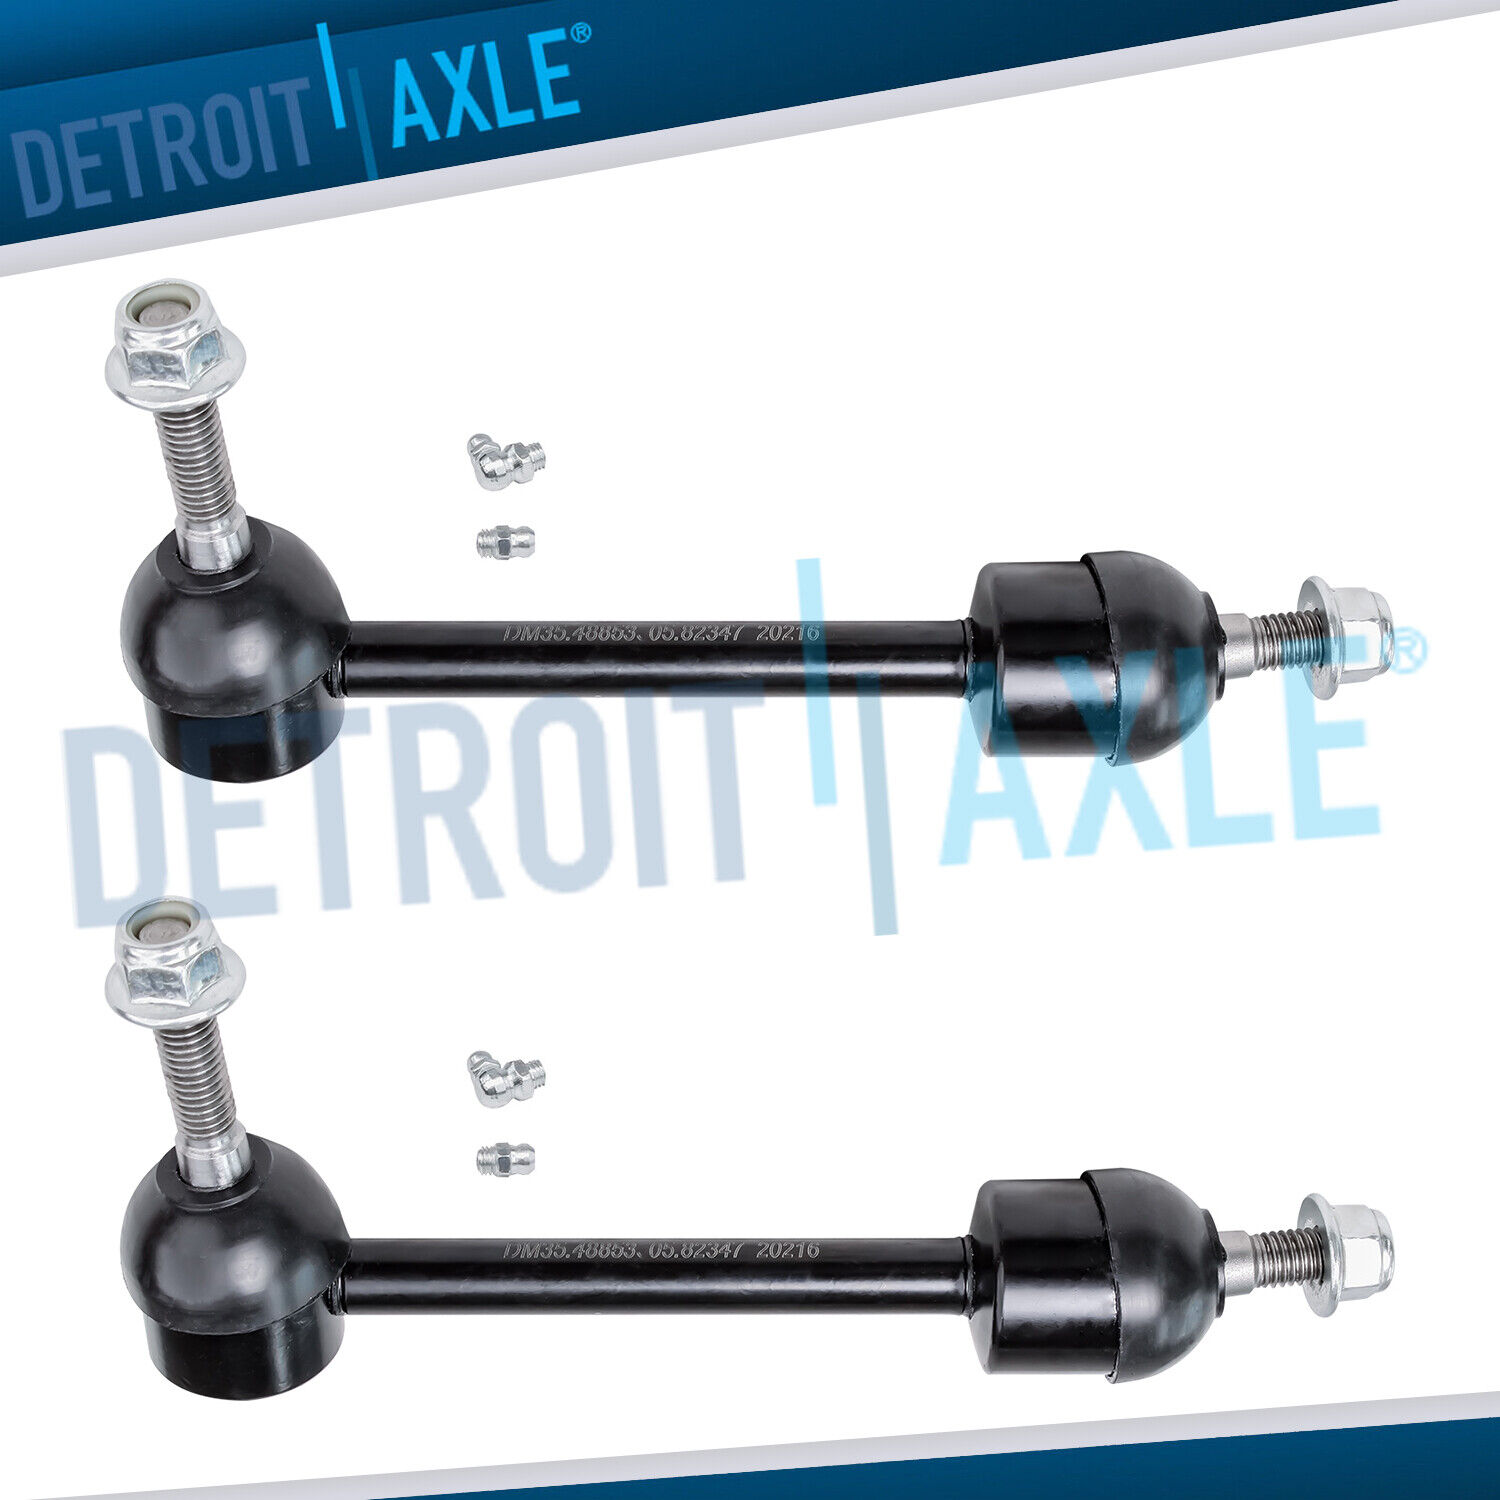 Both (2) New Front Sway Bar Links for Town Car Crown Victoria Grand Marquis